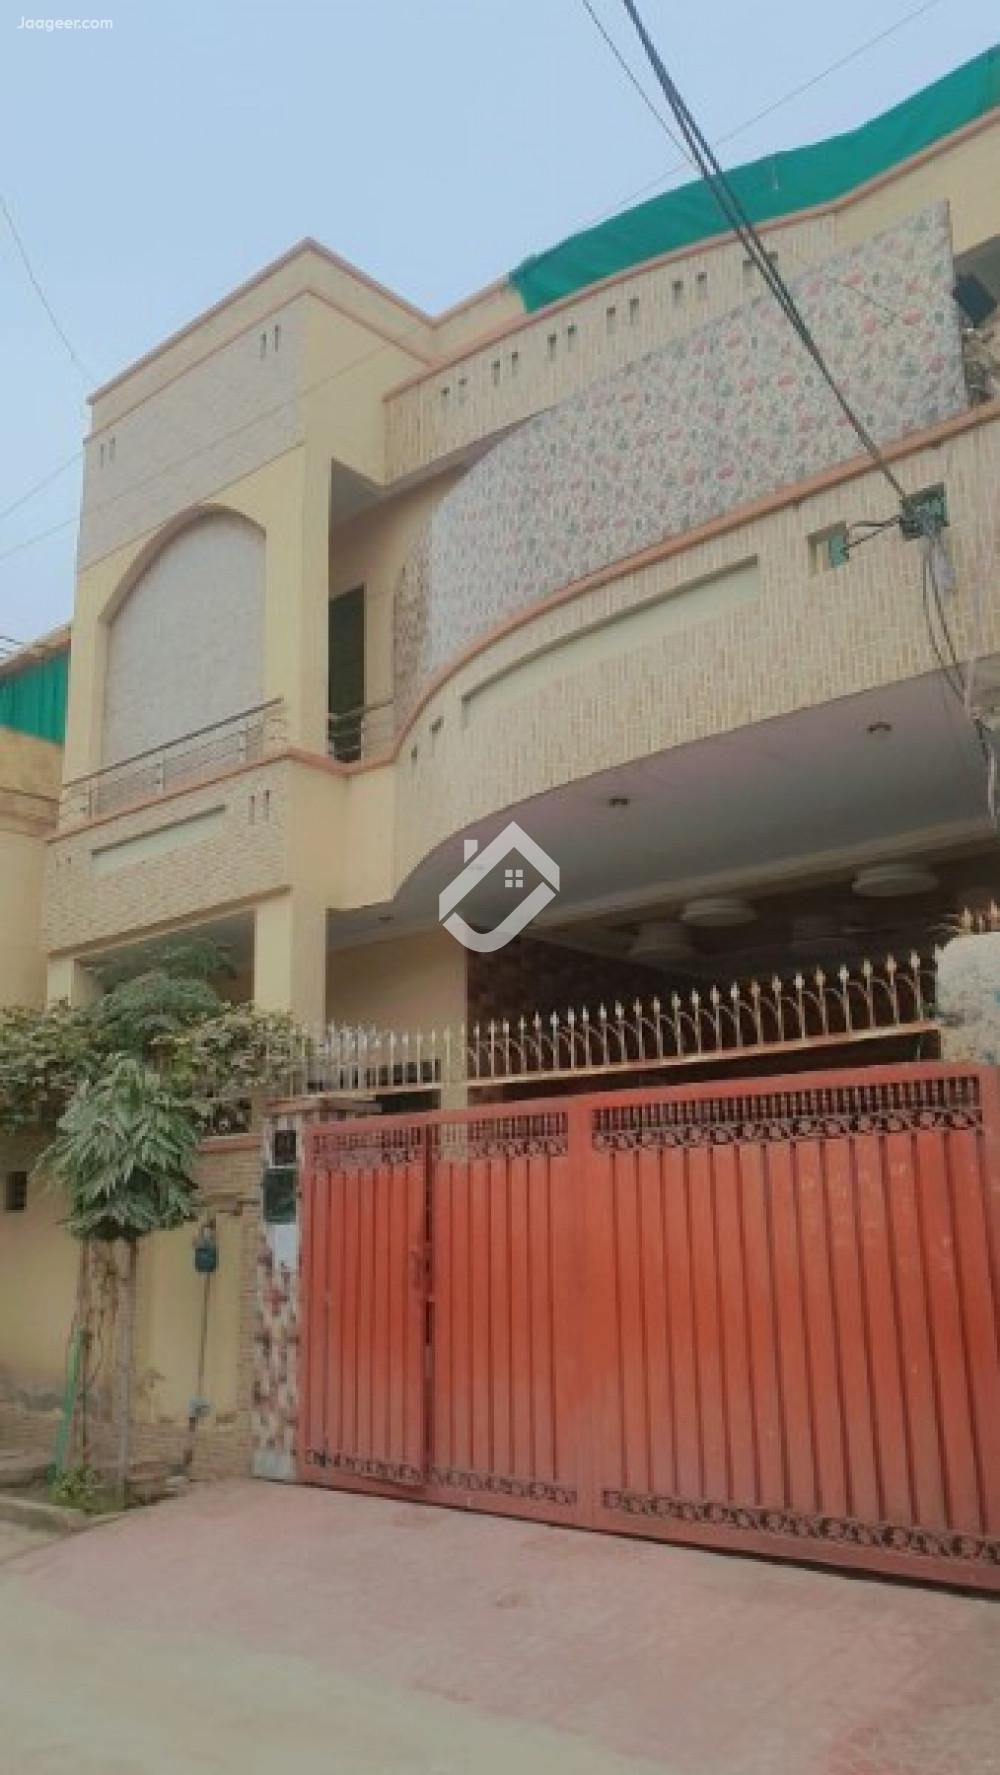 5 Marla Double Storey House For Sale In Shadab Town Near McDonald's  in Shadab Town, Sargodha